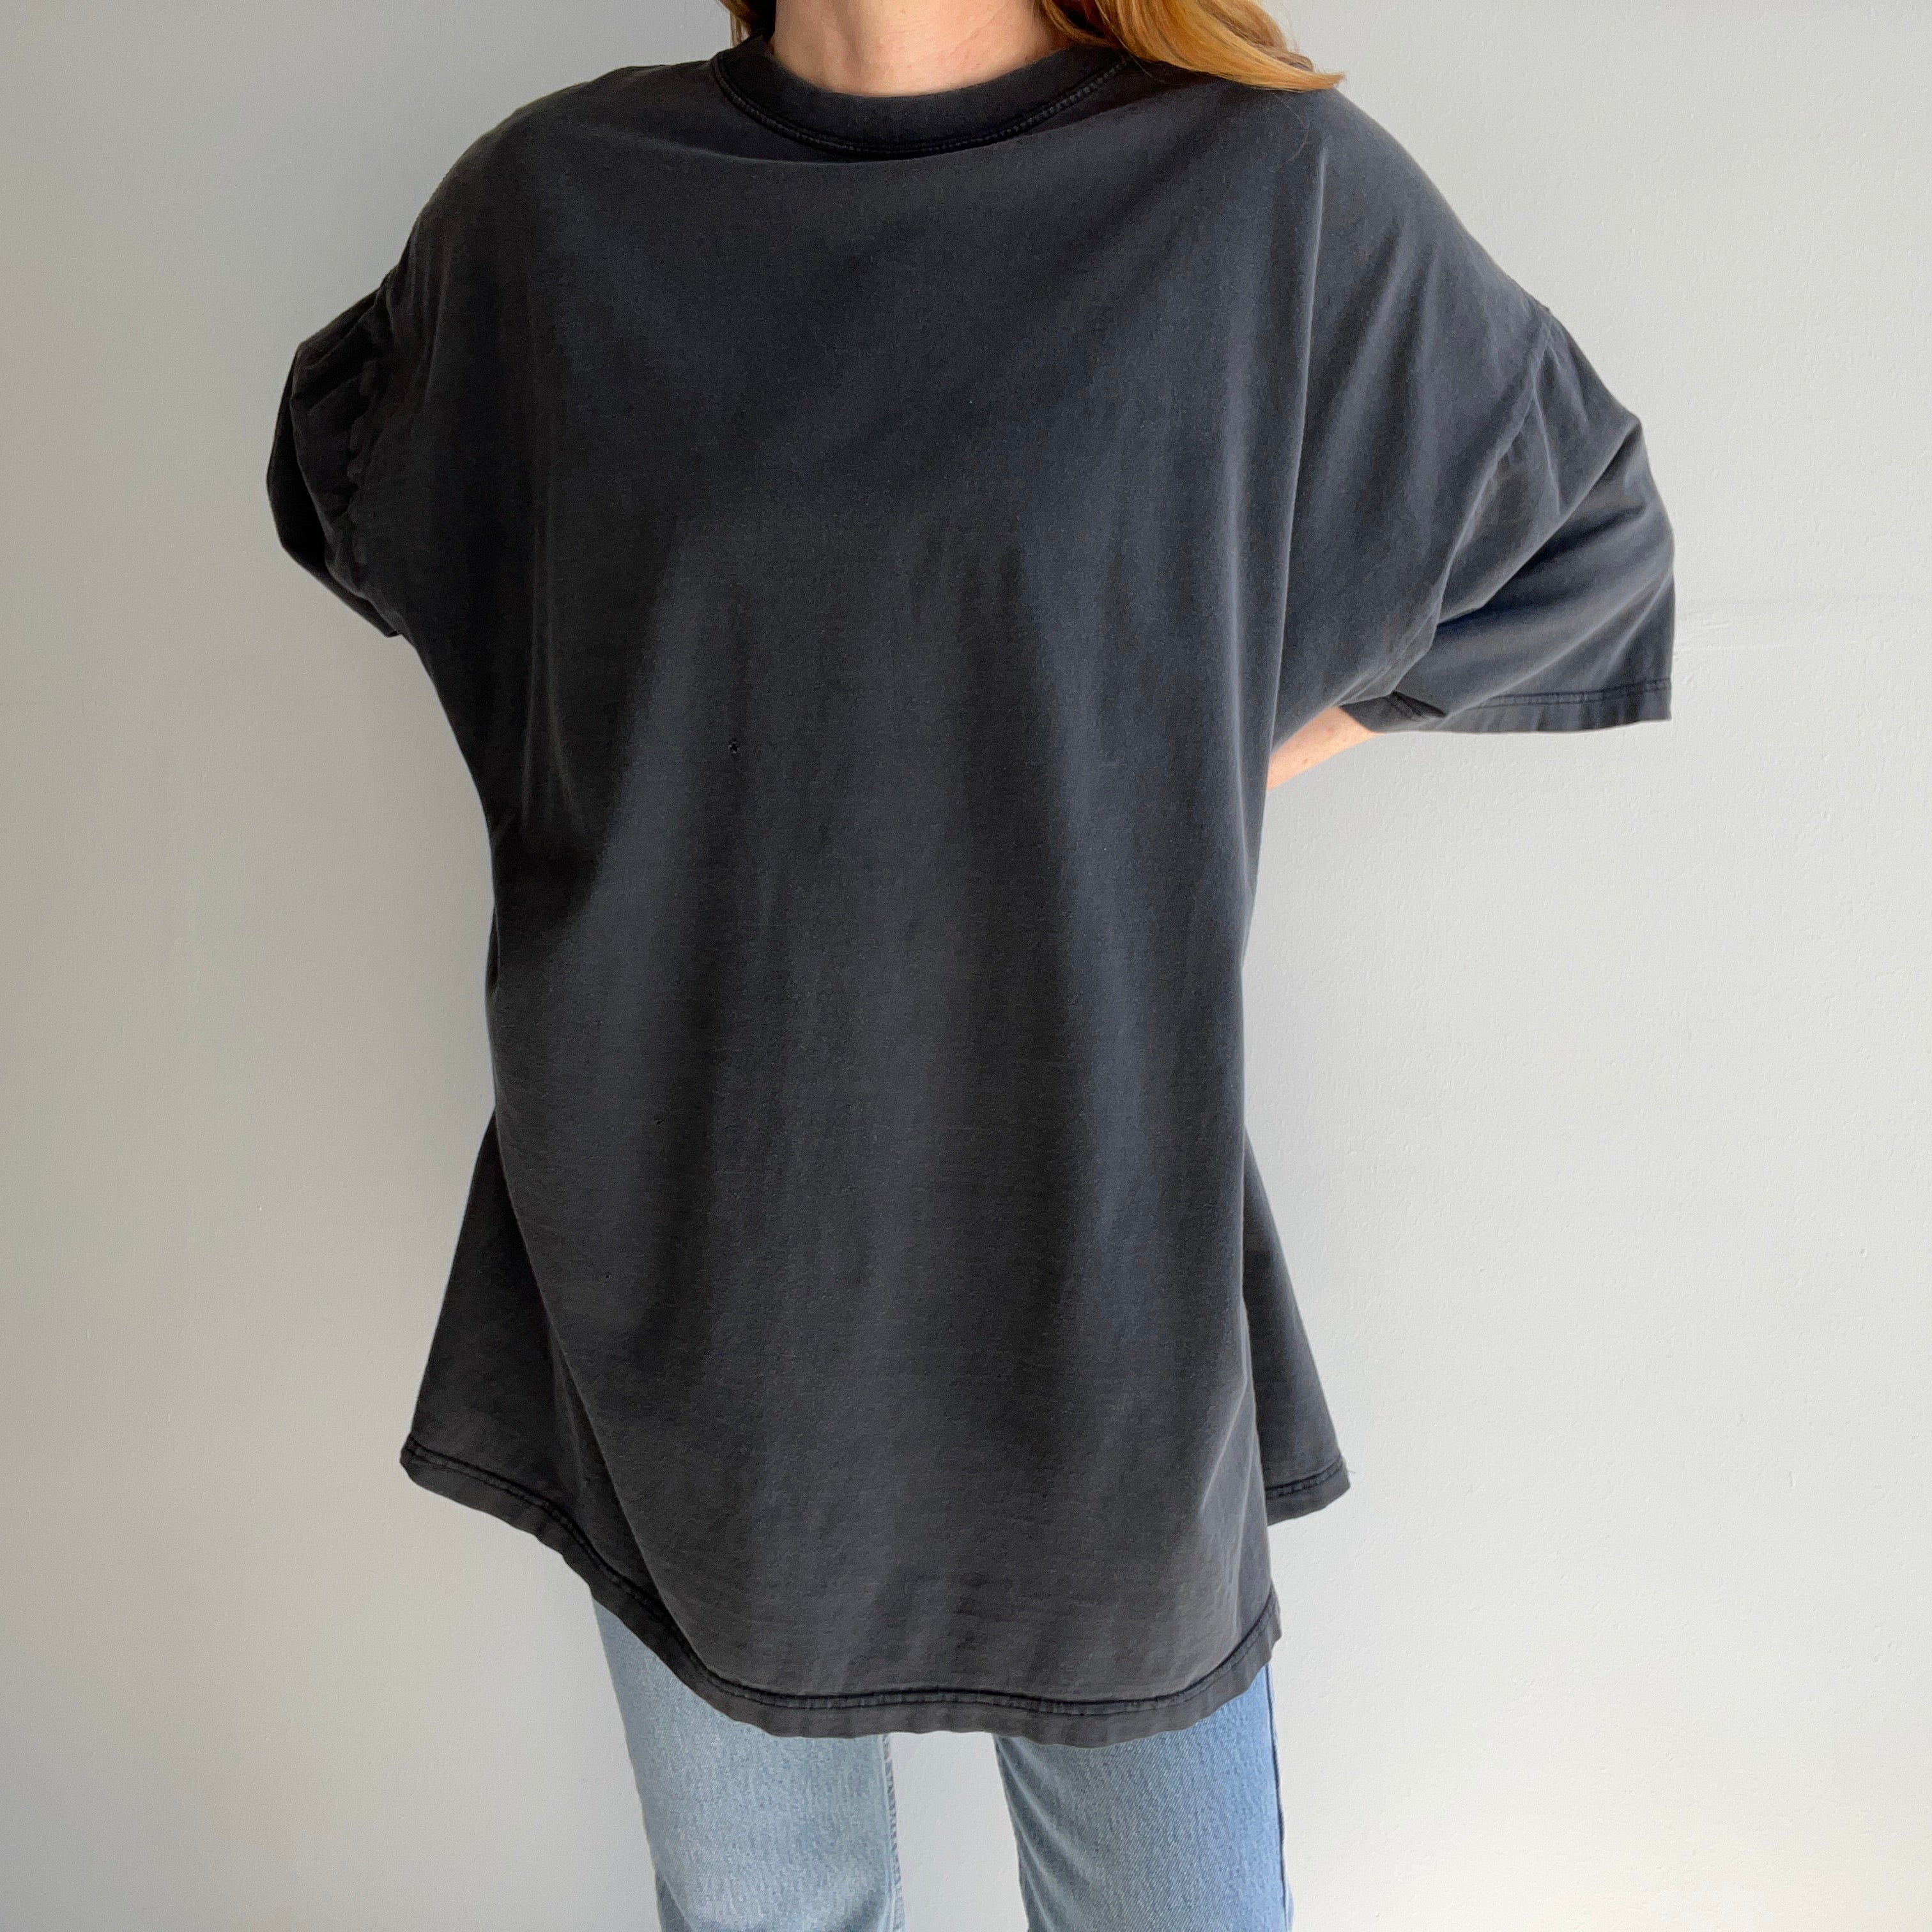 1990s Much Larger Faded Black T-Shirt